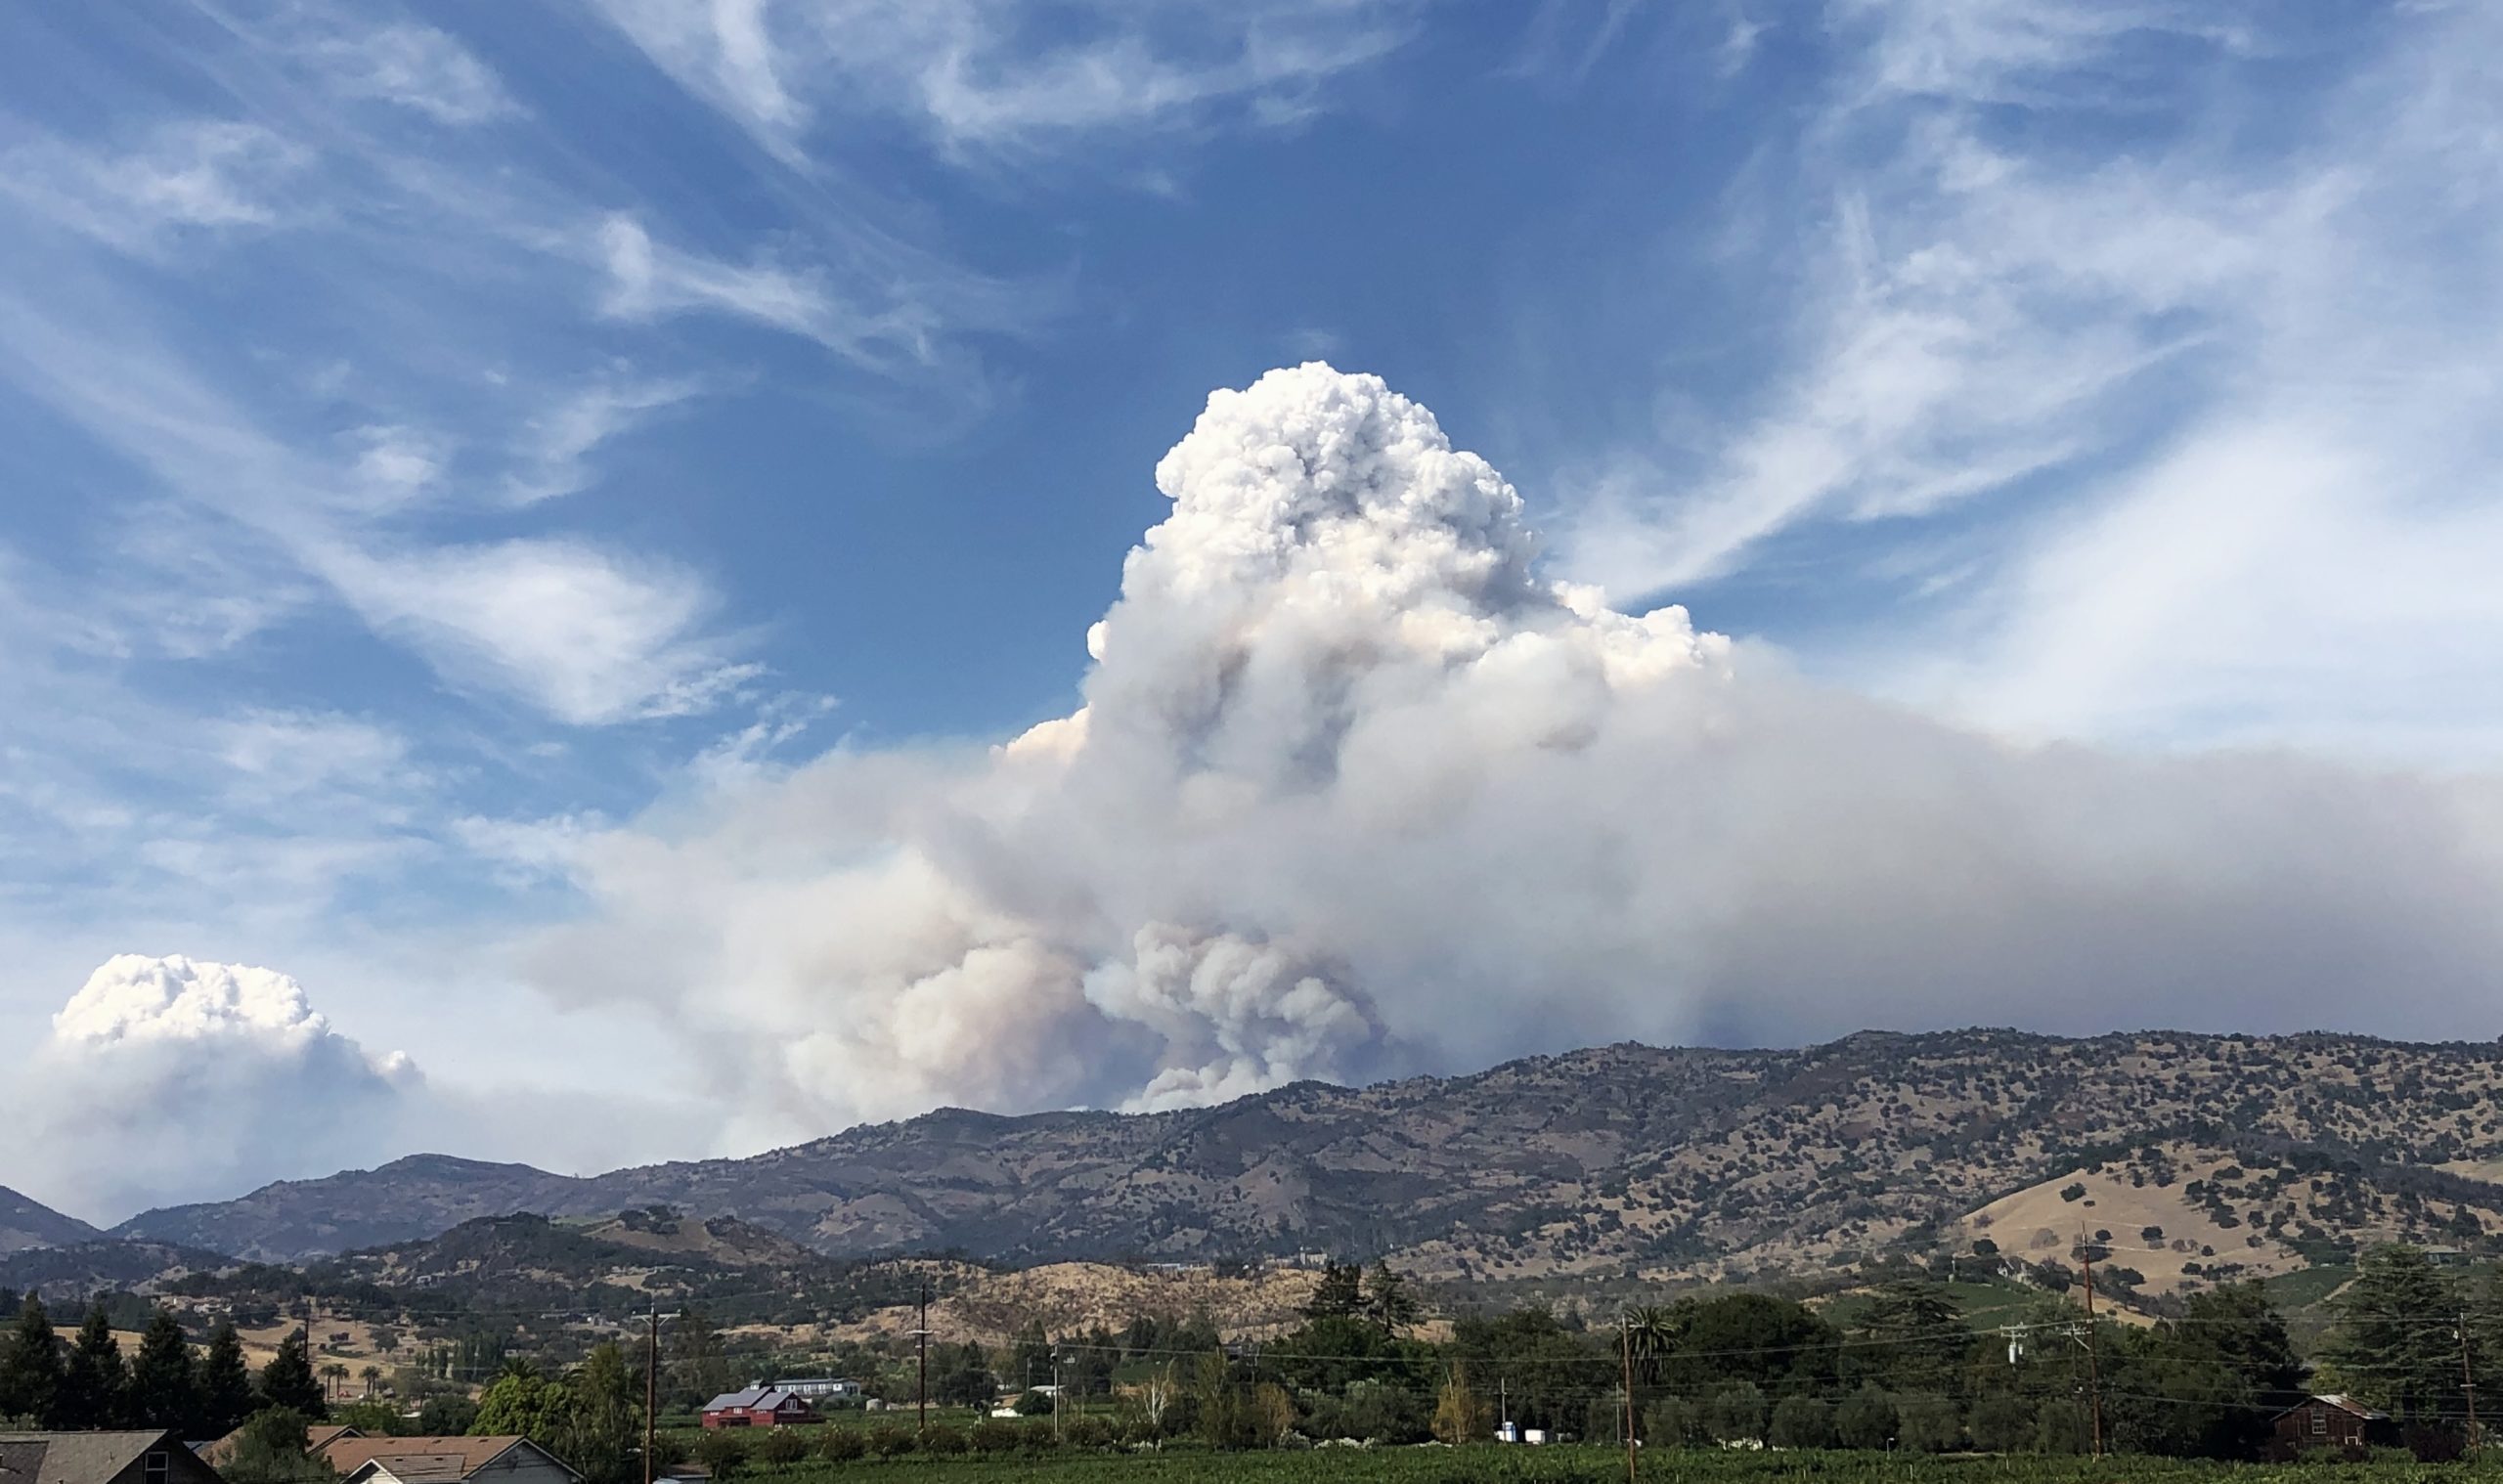 Winemaking, Wildfires, and Why The 2020 Vintage Will Be Limited